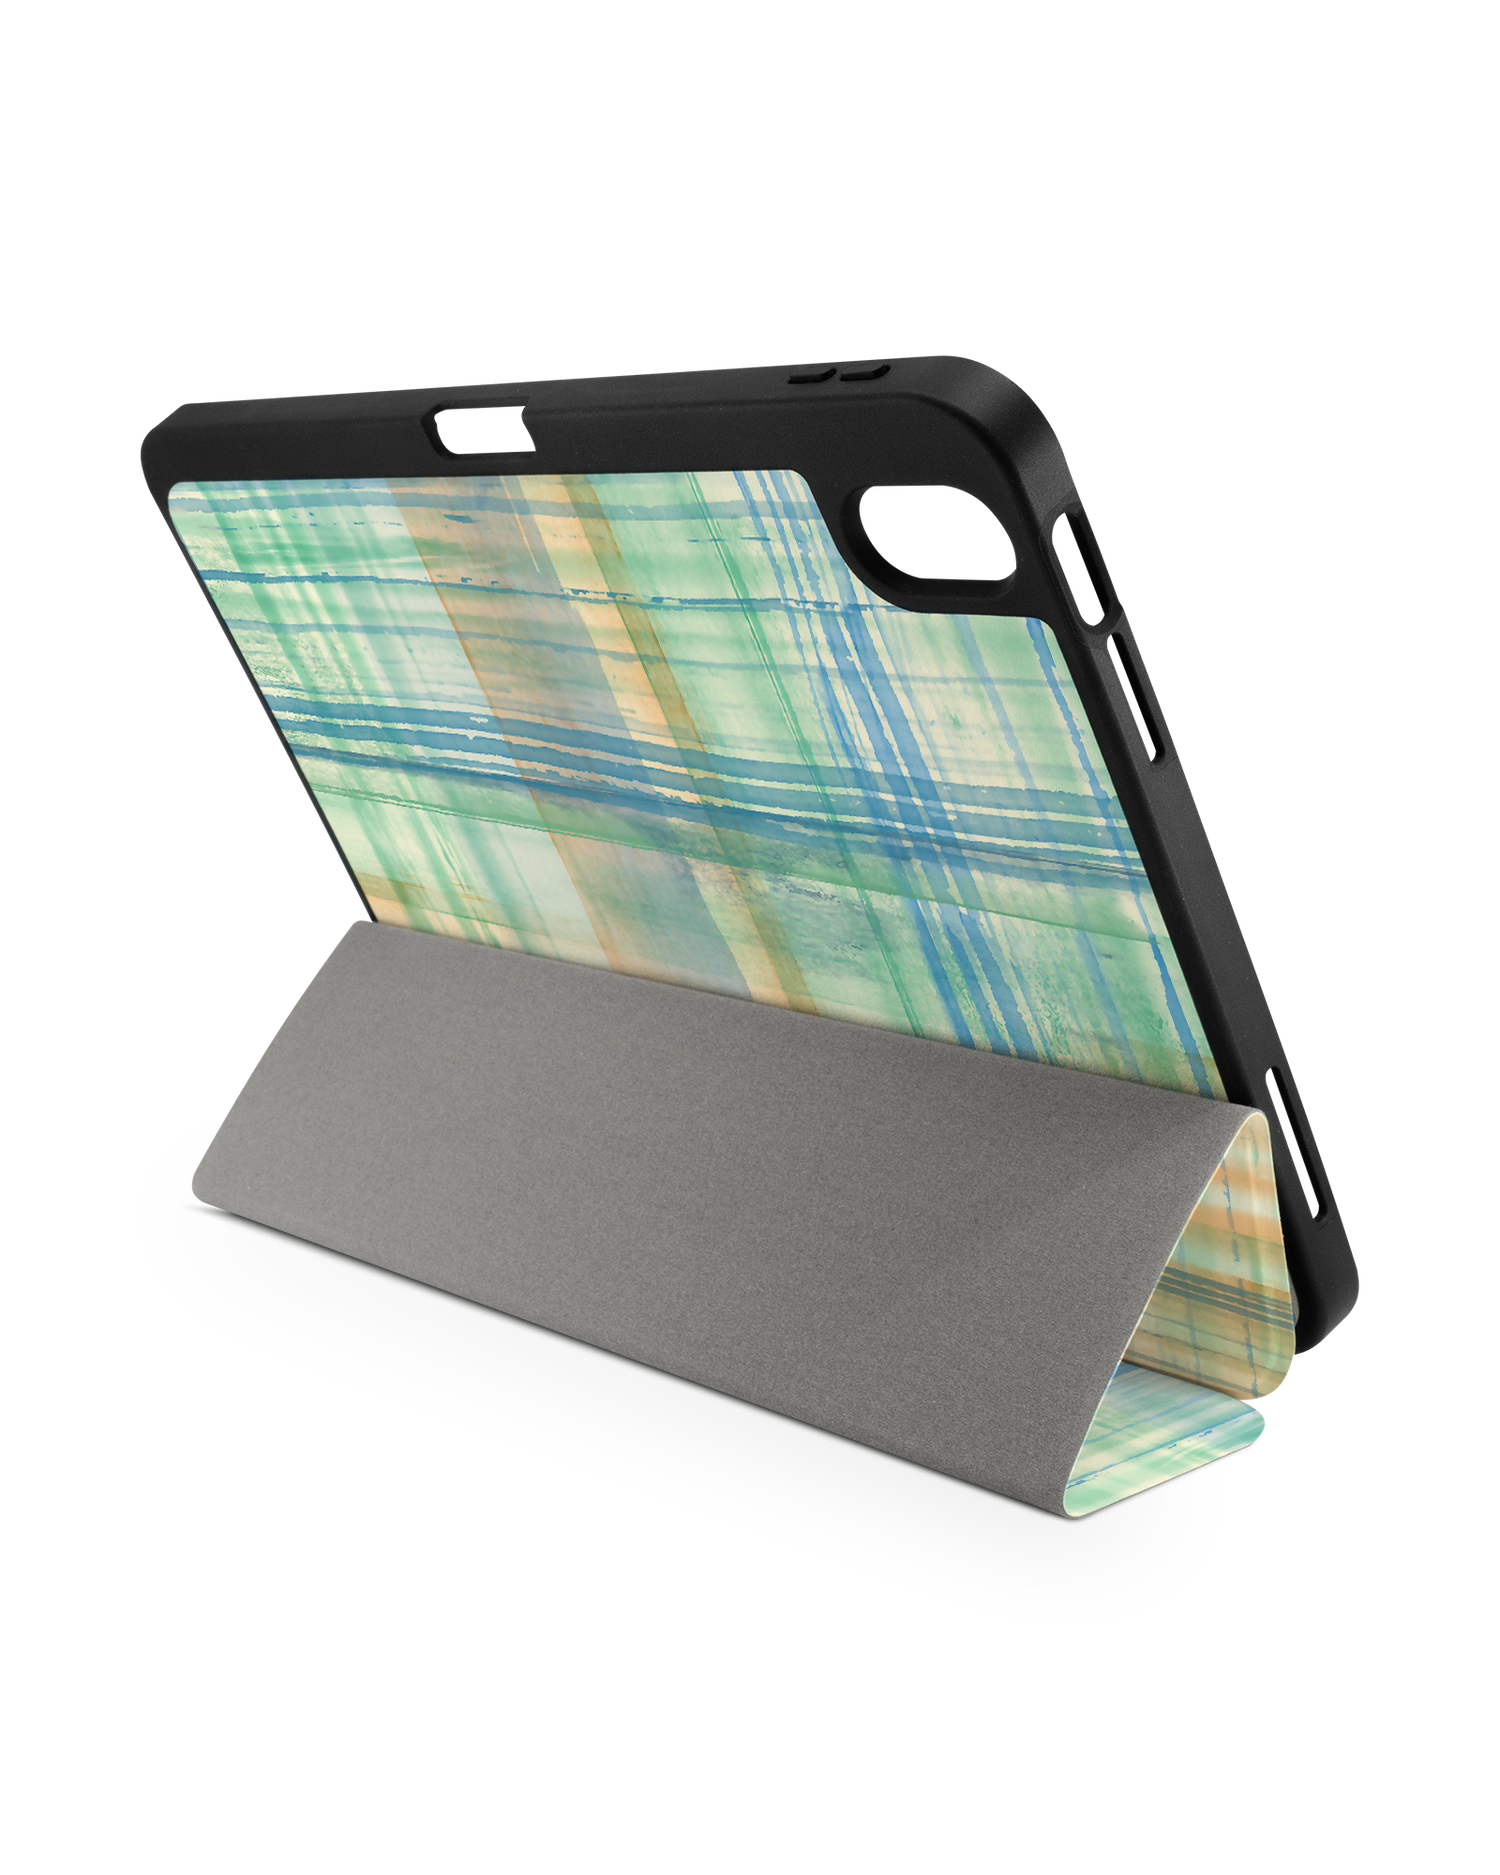 Washed Out Plaid iPad Case with Pencil Holder for Apple iPad (10th Generation): Set up in landscape format (back view)